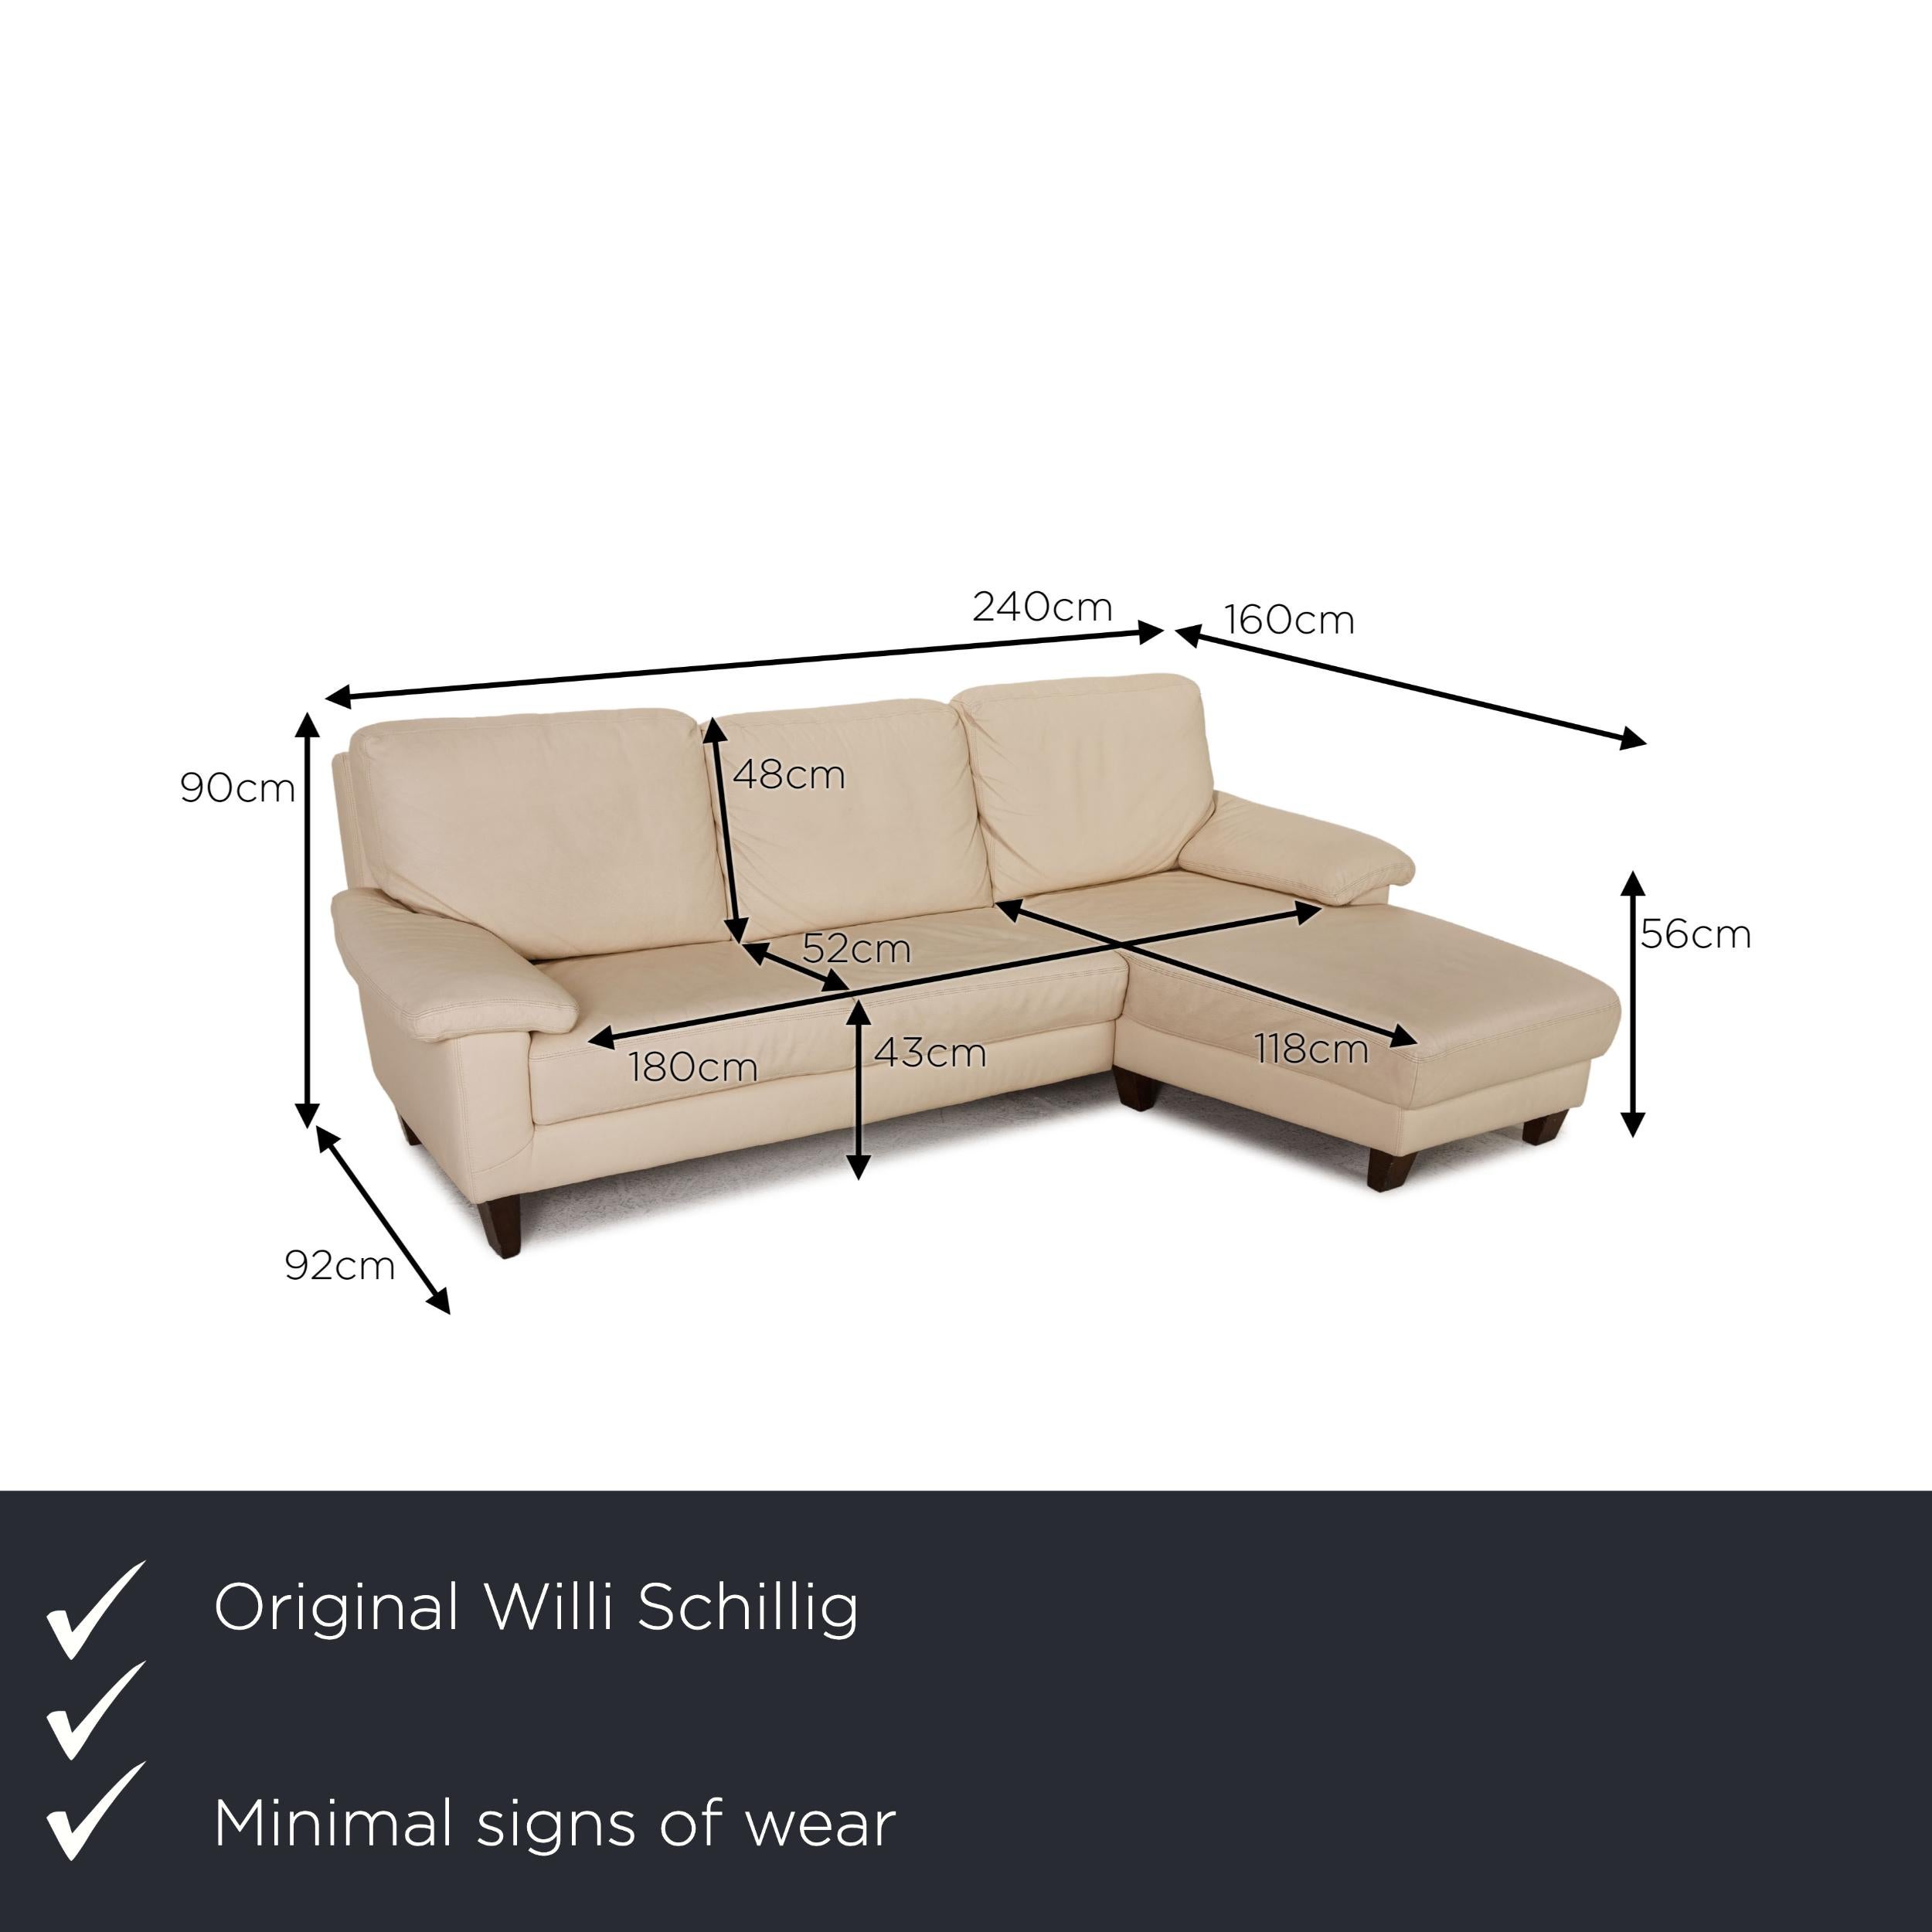 We present to you a Willi Schillig leather sofa cream corner sofa couch.

Product measurements in centimeters:

depth: 92
width: 240
height: 90
seat height: 43
rest height: 56
seat depth: 52
seat width: 180
back height: 48.
 